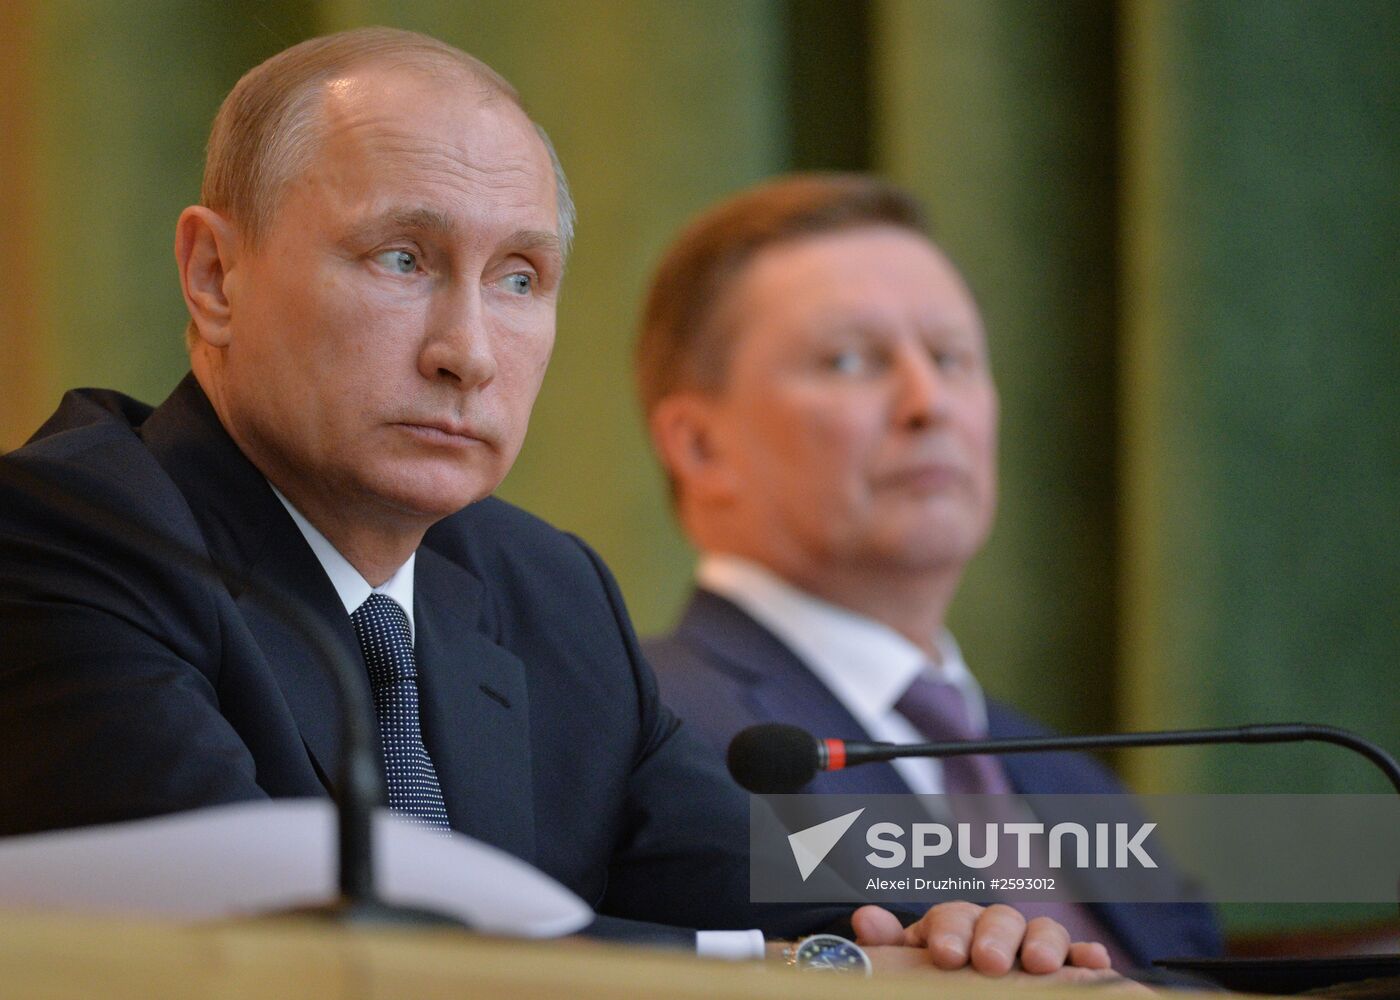 President Vladimir Putin at expanded meeting of board of Russian Prosecutor General's Office